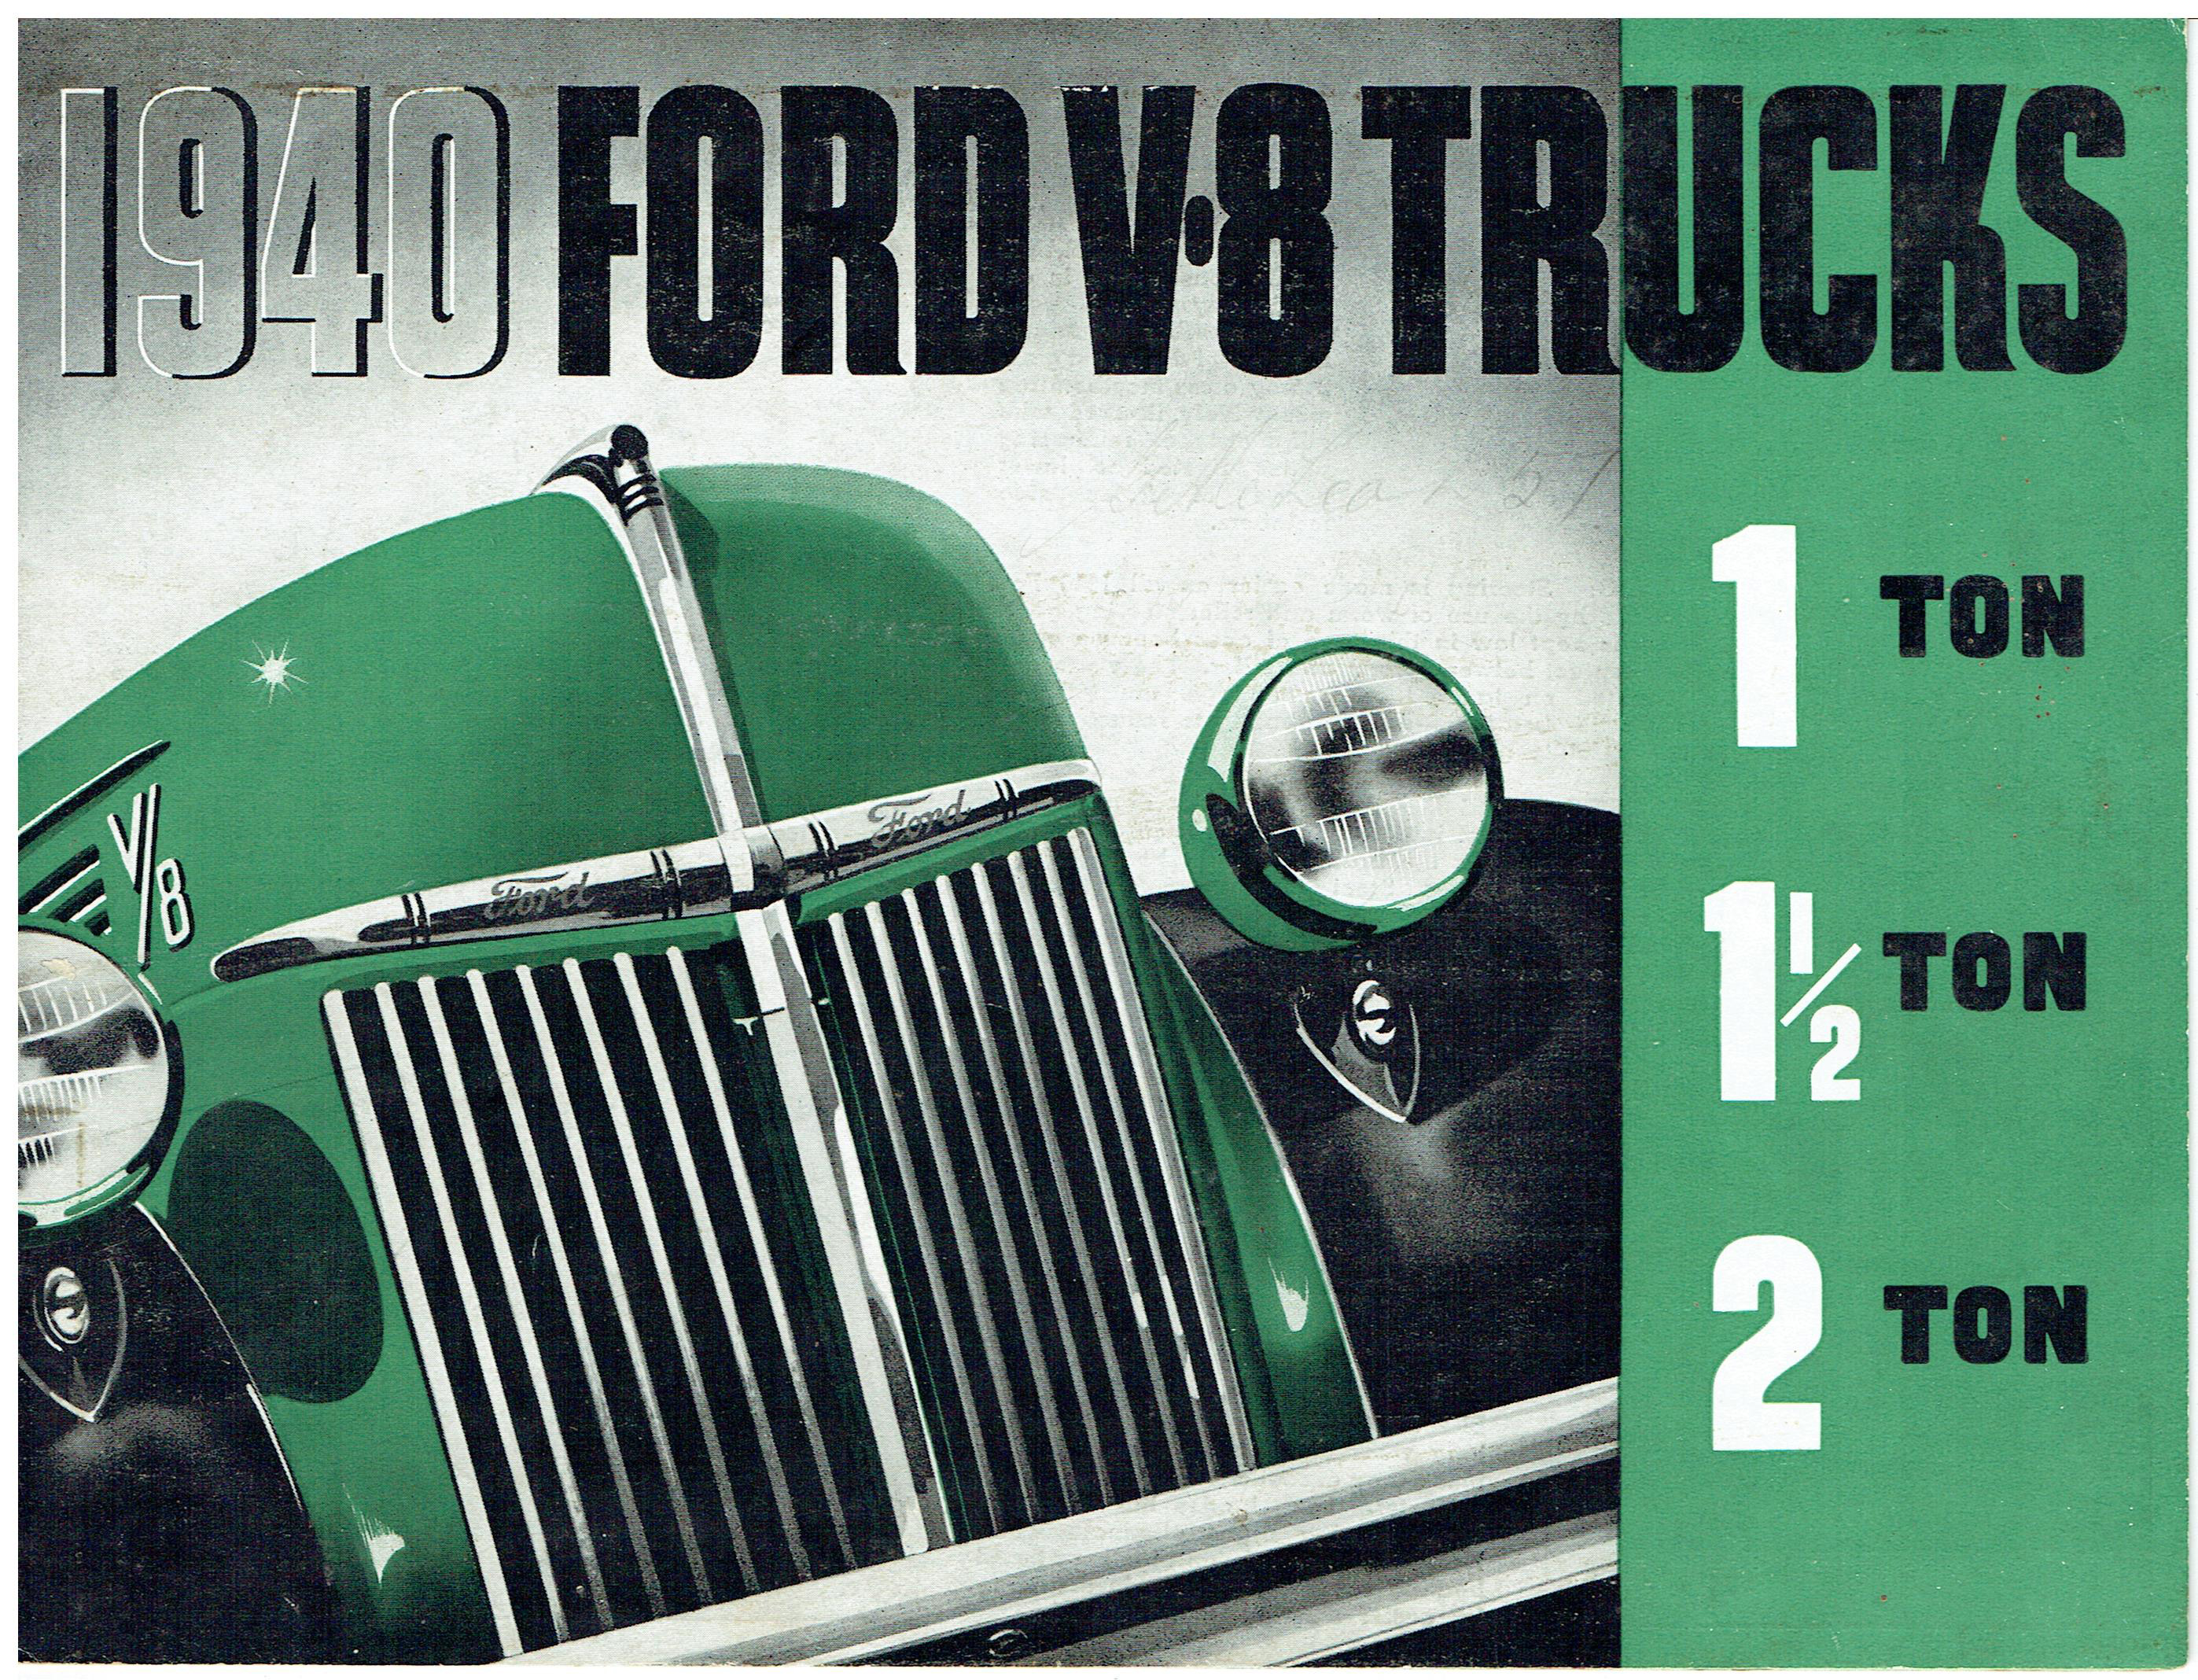 1940 Ford 1-2 Ton Truck front cover